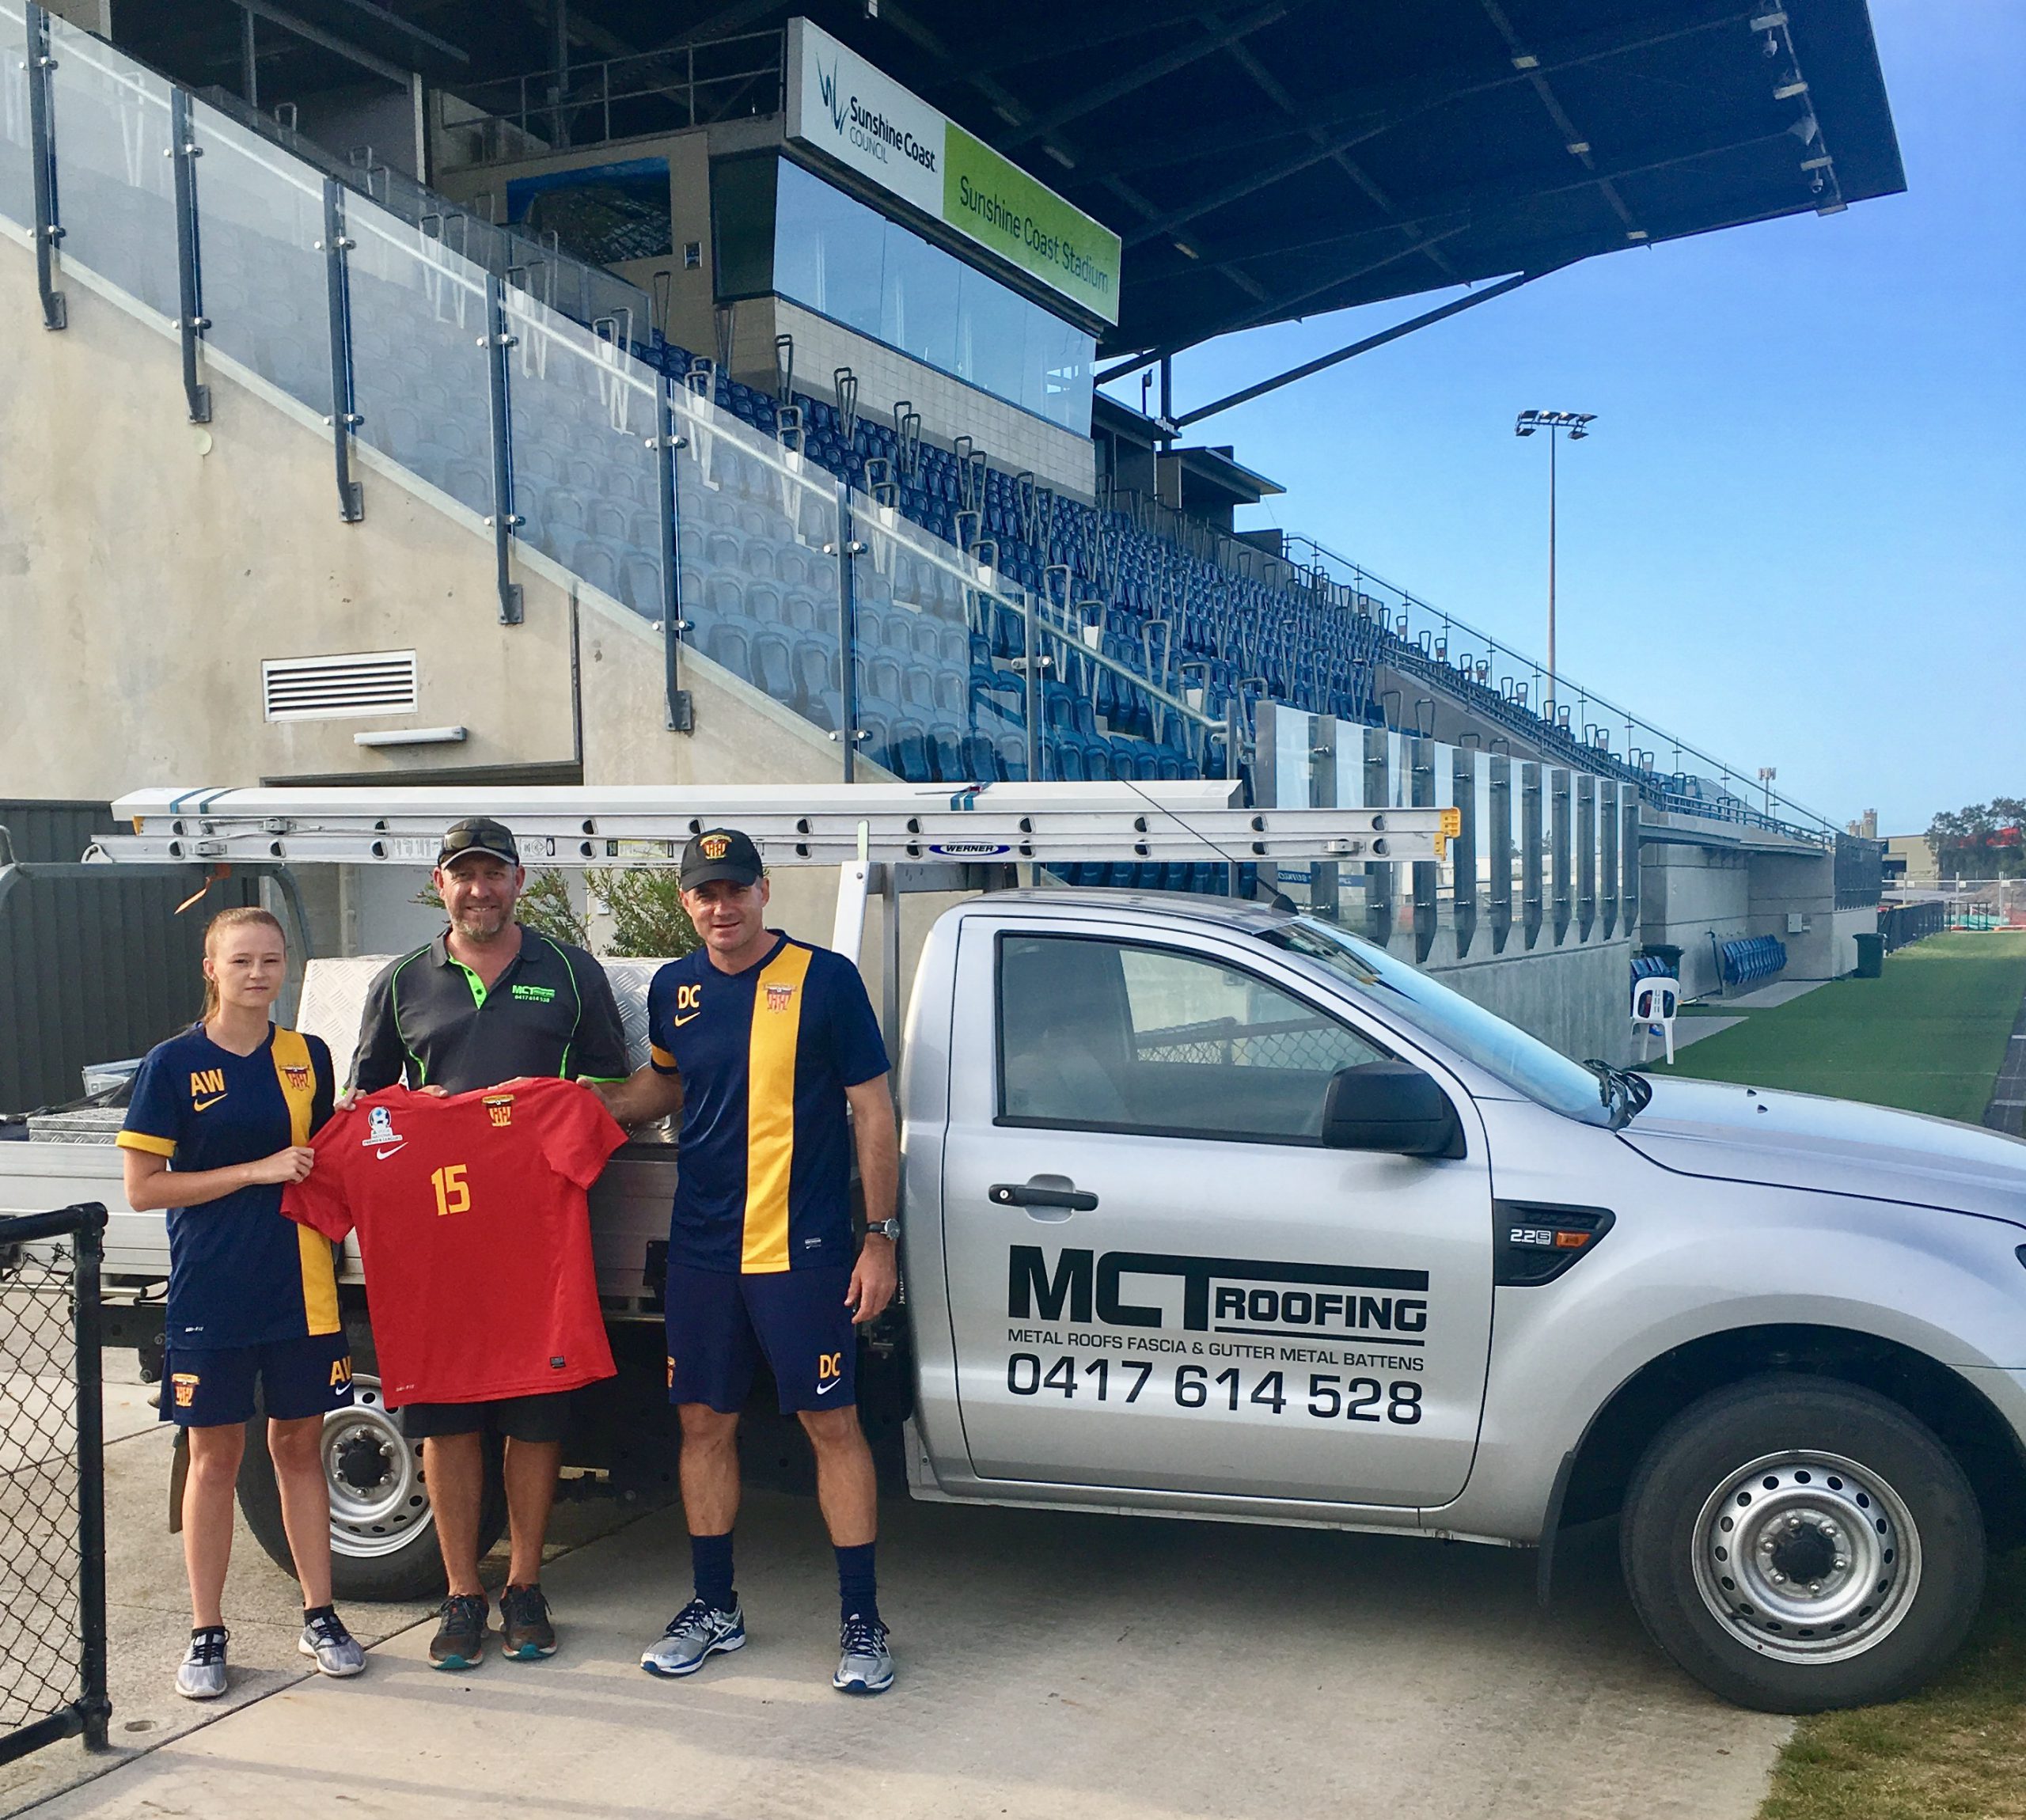 MCT Roofing partners with Sunshine Coast FC